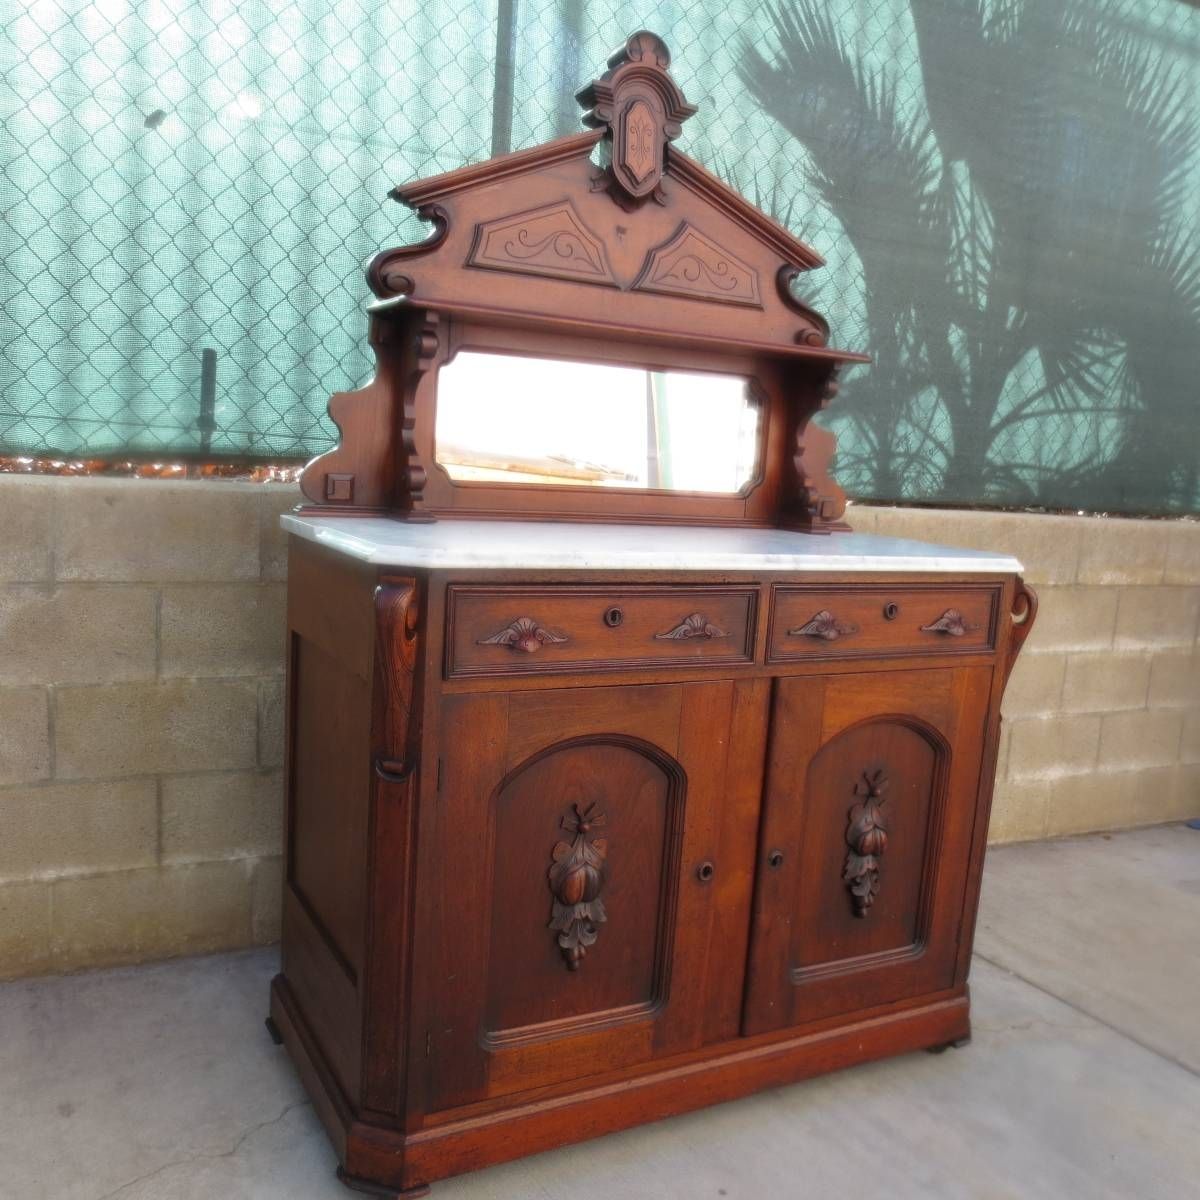 Antique Sideboards And Buffets — All Furniture : Antique Within Most Popular Antique Sideboards With Mirror (View 10 of 15)